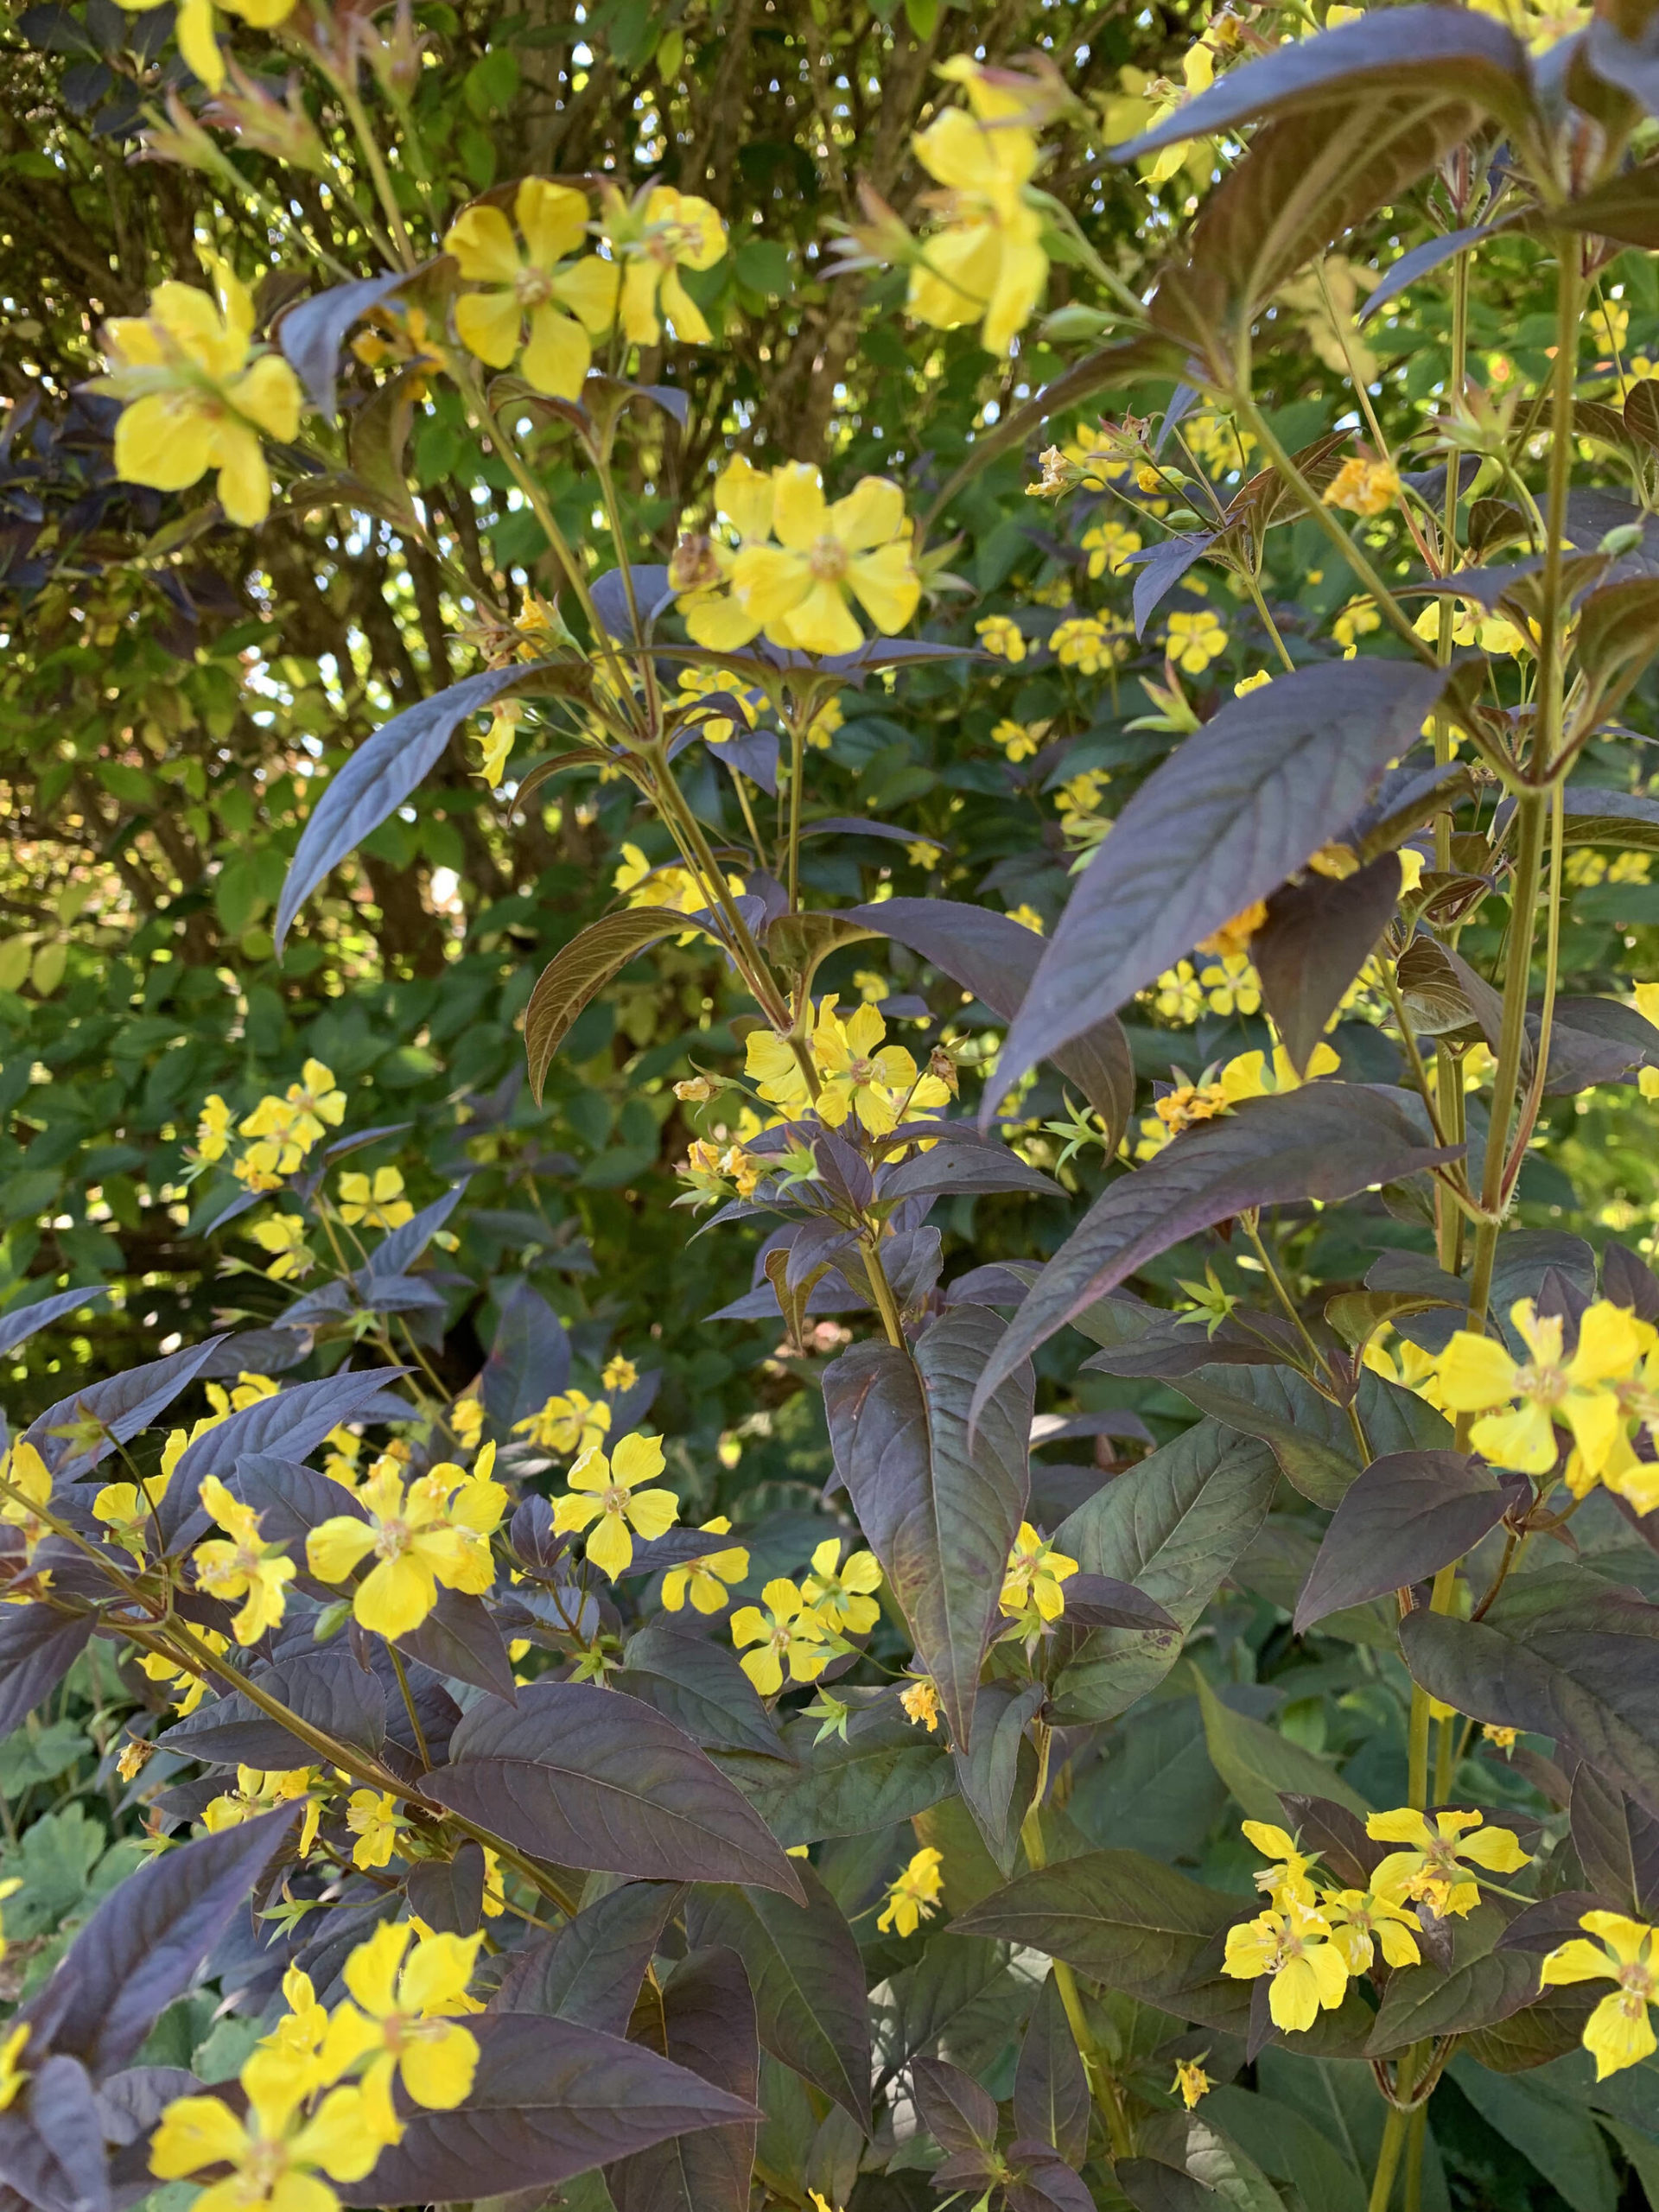 Lysimachia purpurea’s yellow blooms glimmer in the fall light. (Photo by Rosemary Fitzpatrick)